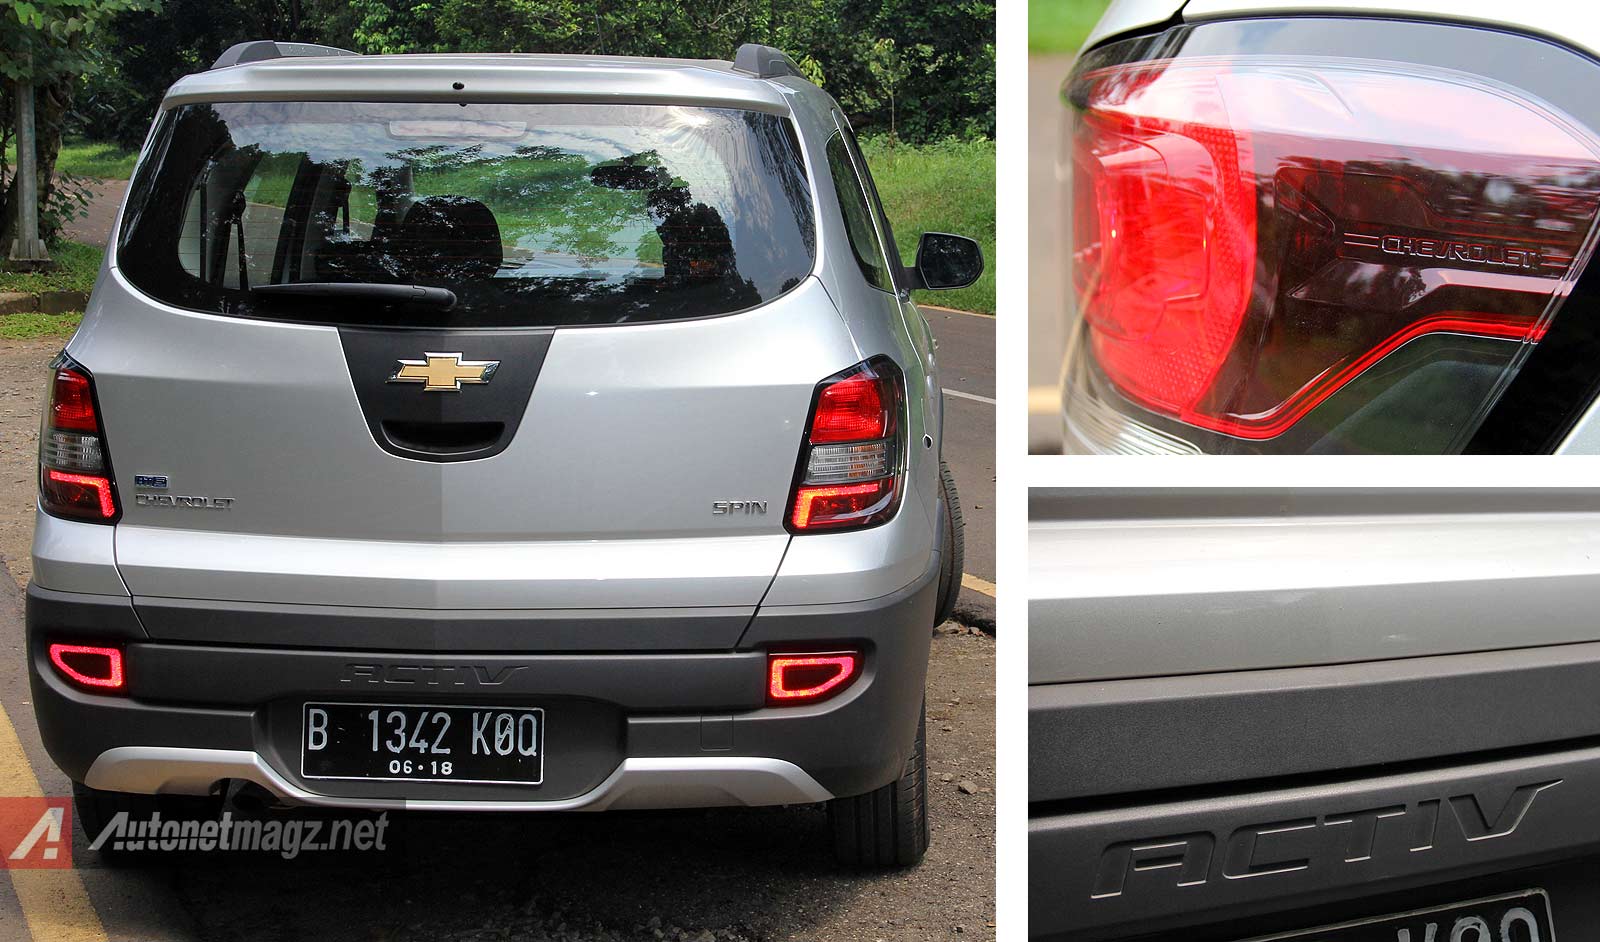 Chevrolet, Detail perubahan pada Chevrolet Spin Activ crossover style: Test Drive Review Chevrolet Spin Activ 1.5 AT by AutonetMagz [with Video]